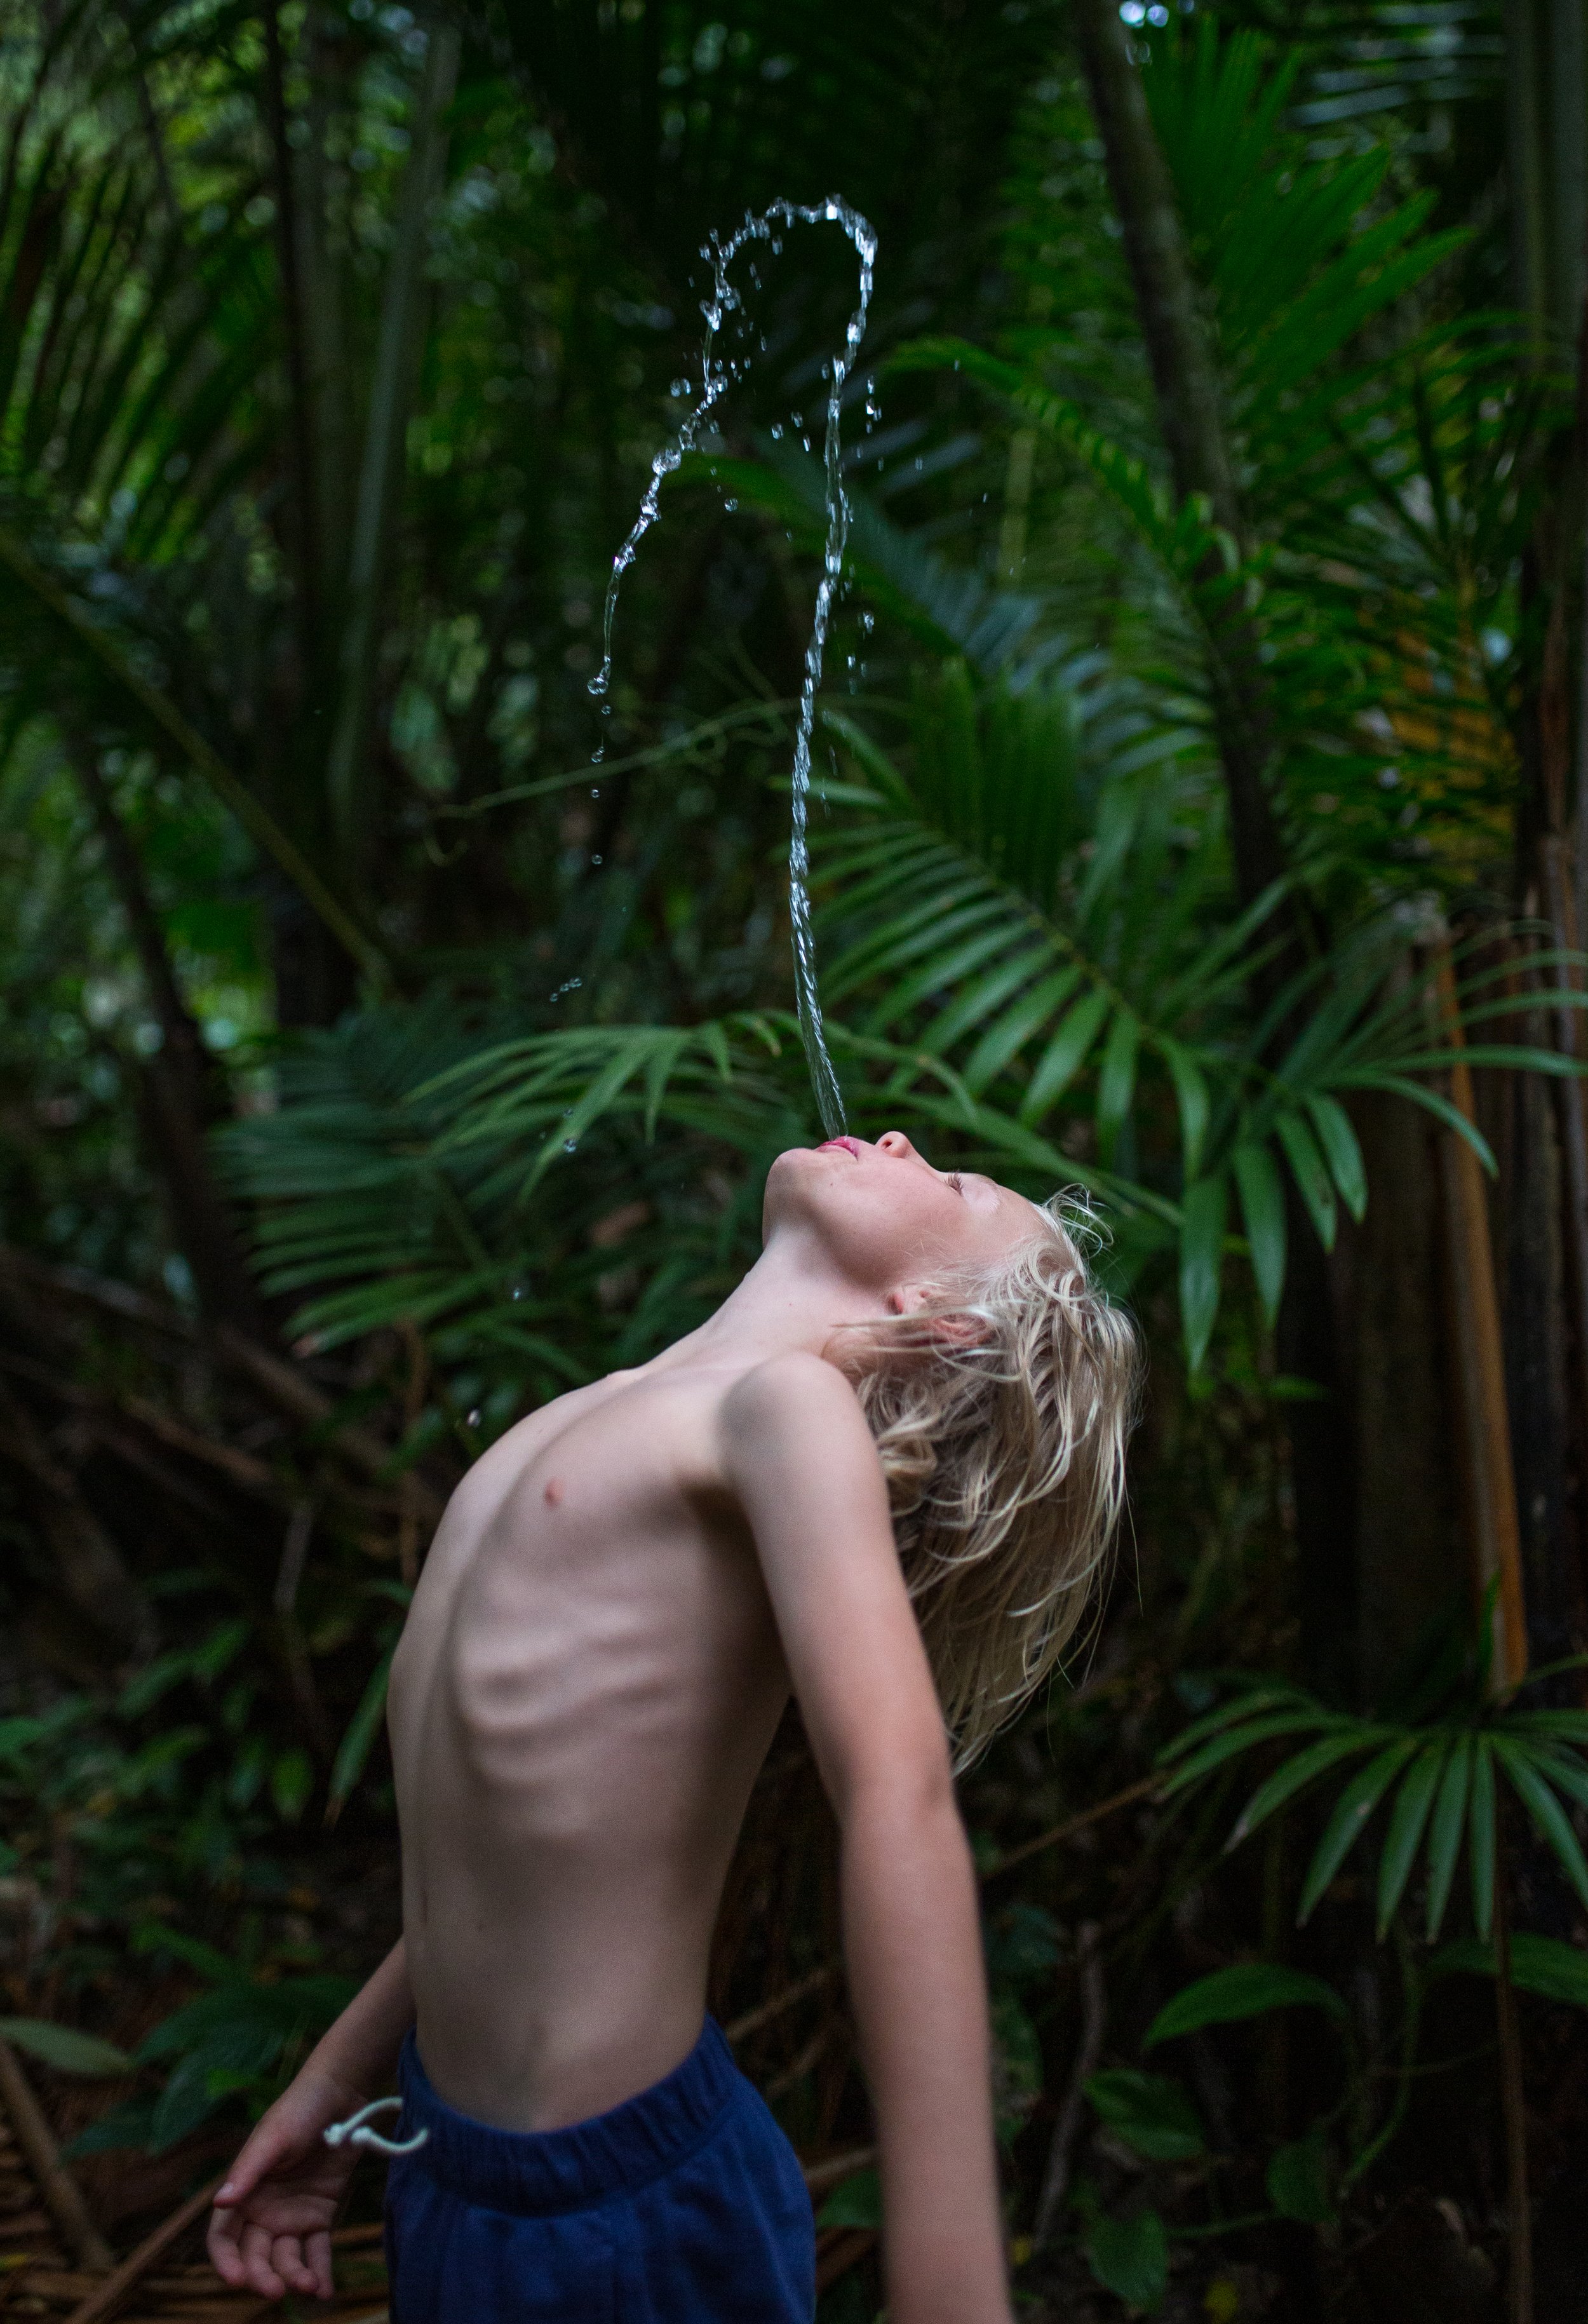   Papua New Guinea, 2016 -  Spitting water in a jungle on the Southern Coast.  